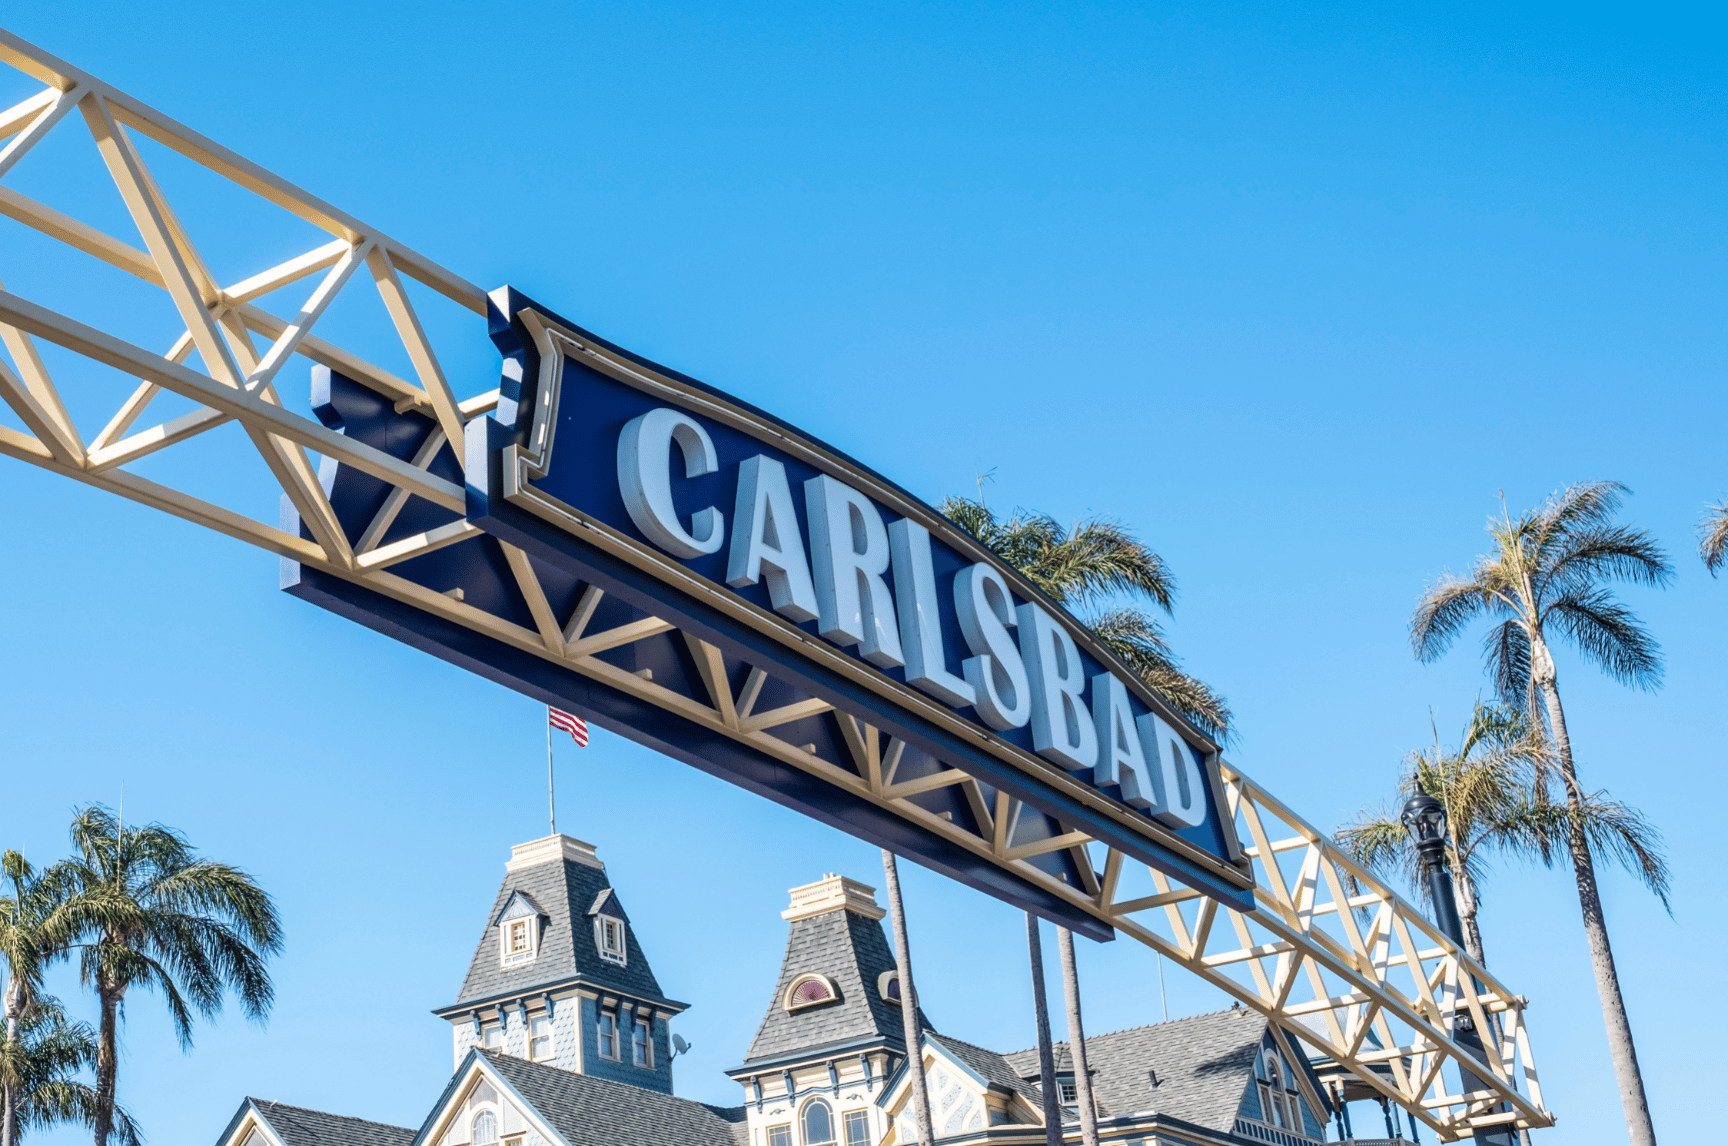 10 Places Locals & Visitors Love to Eat & Drink in Carlsbad